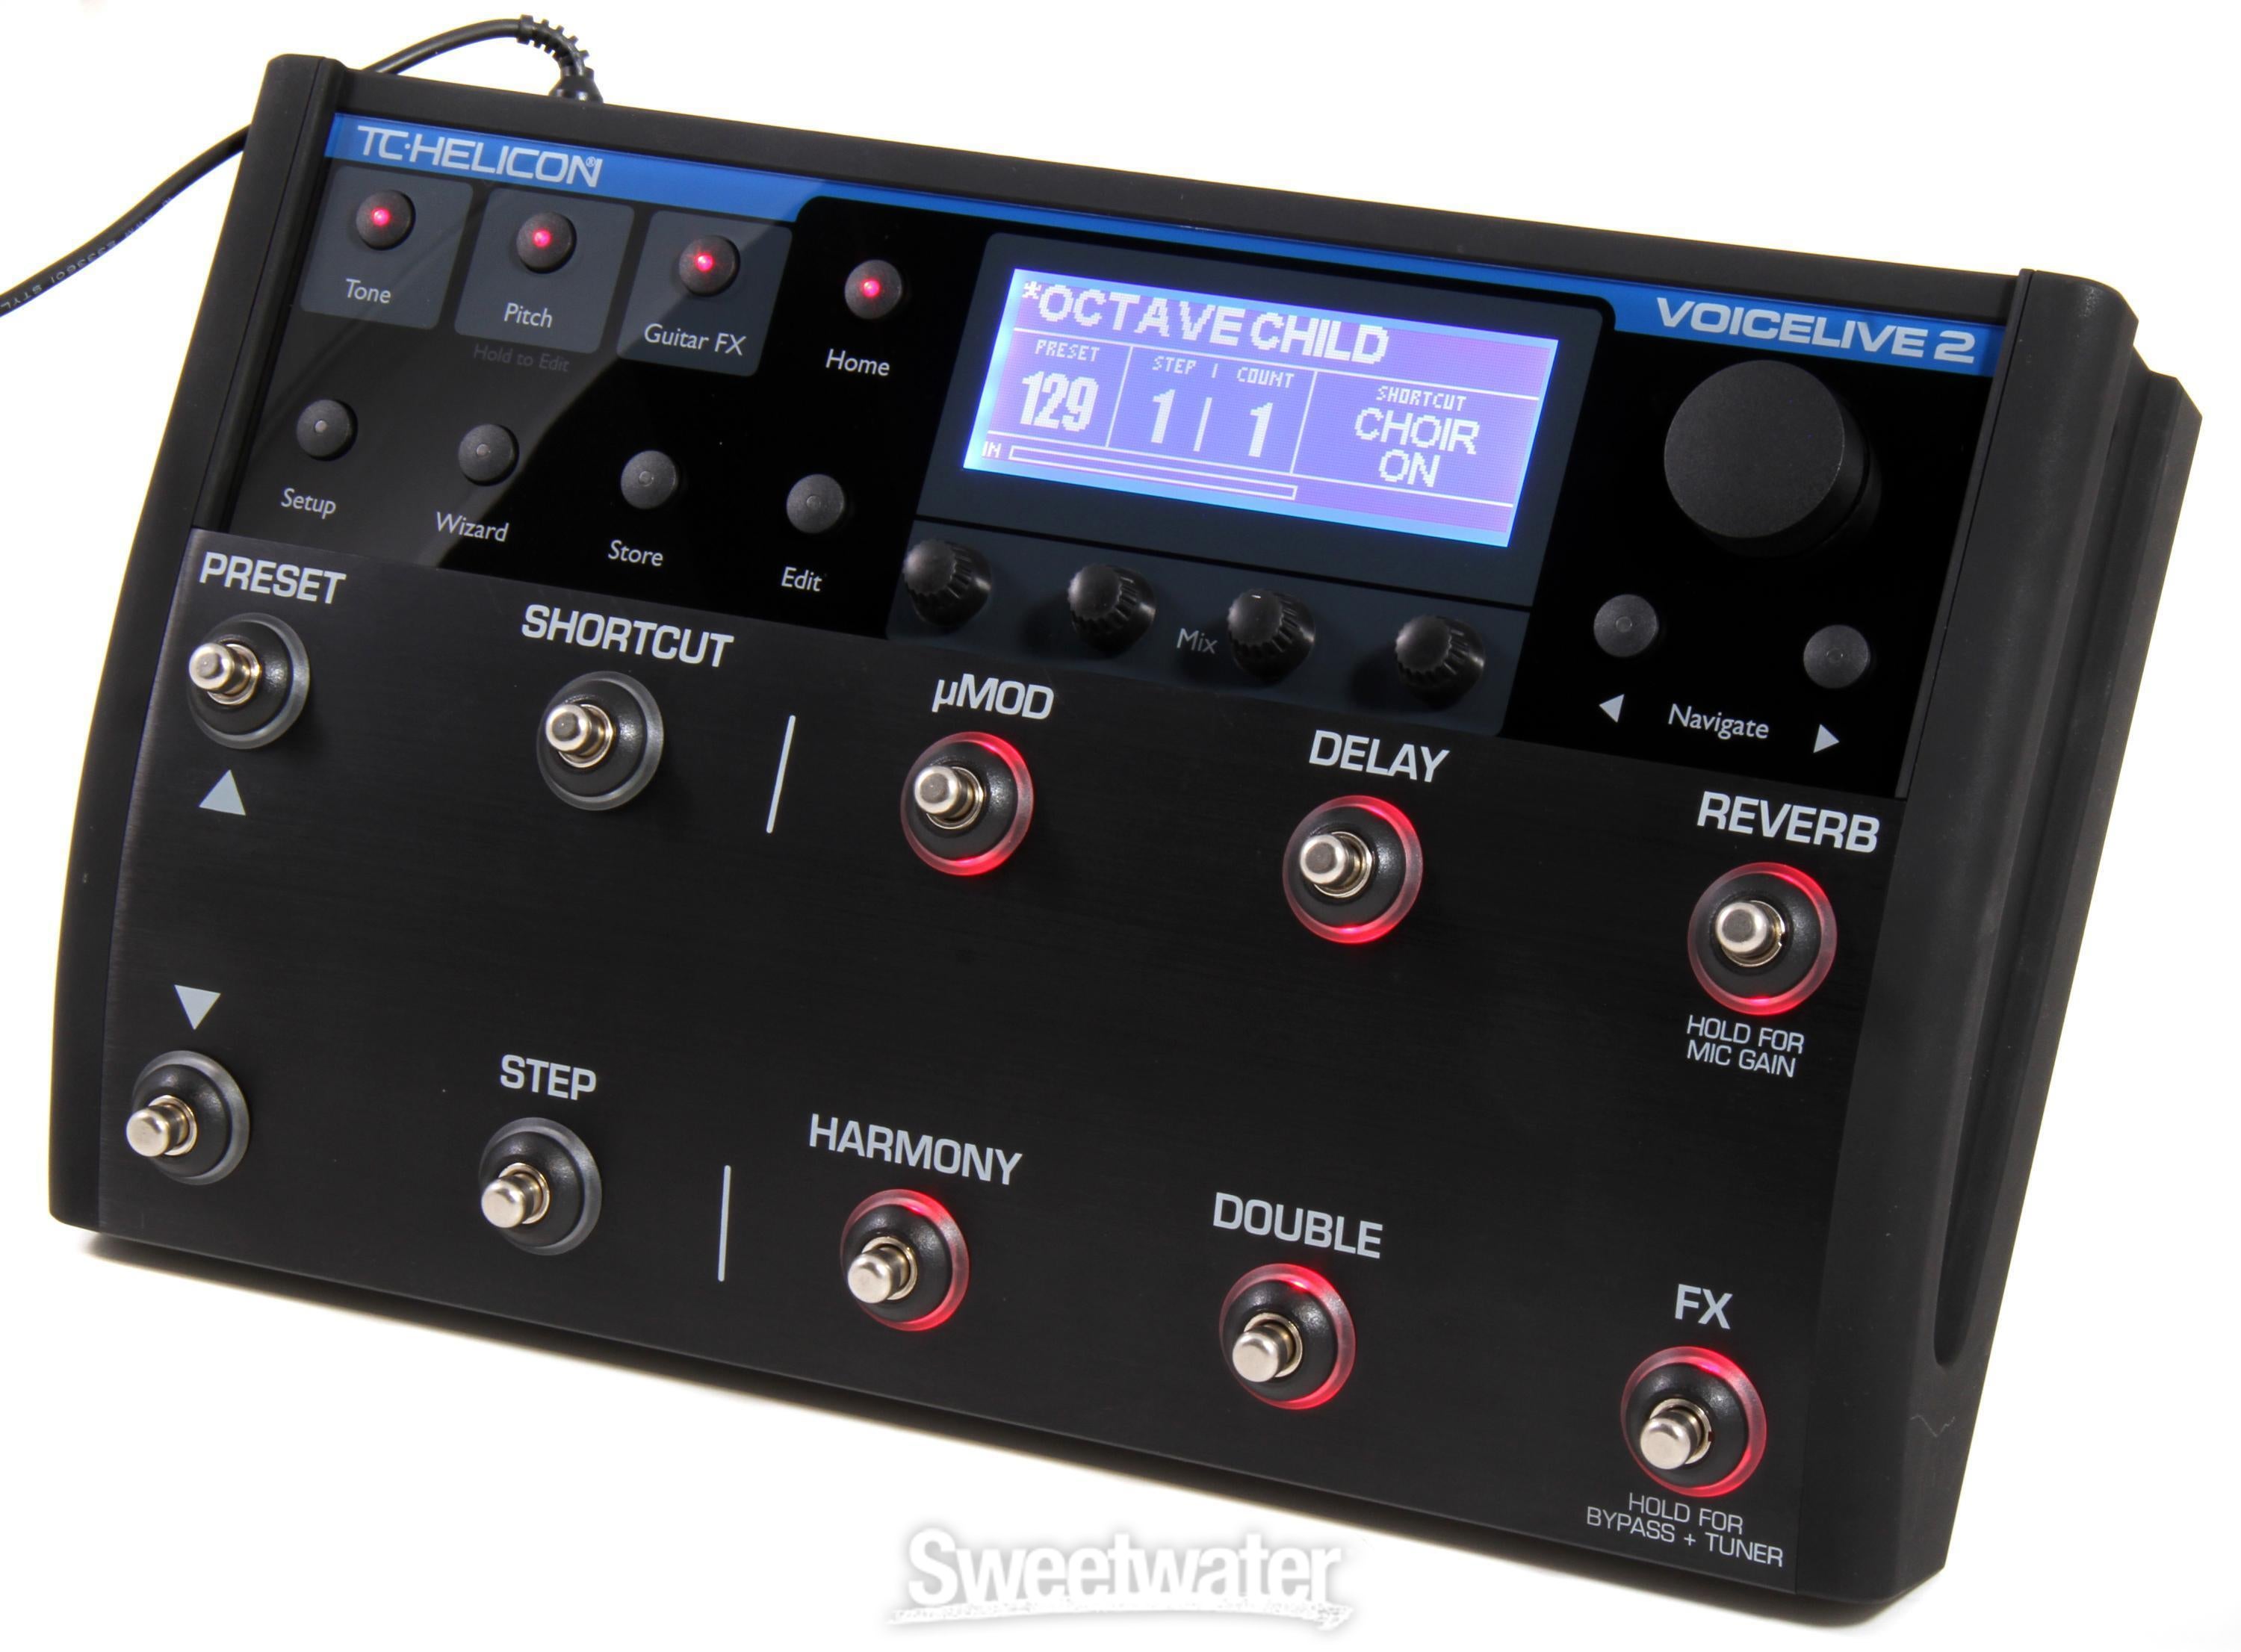 TC-Helicon VoiceLive 2 Reviews | Sweetwater